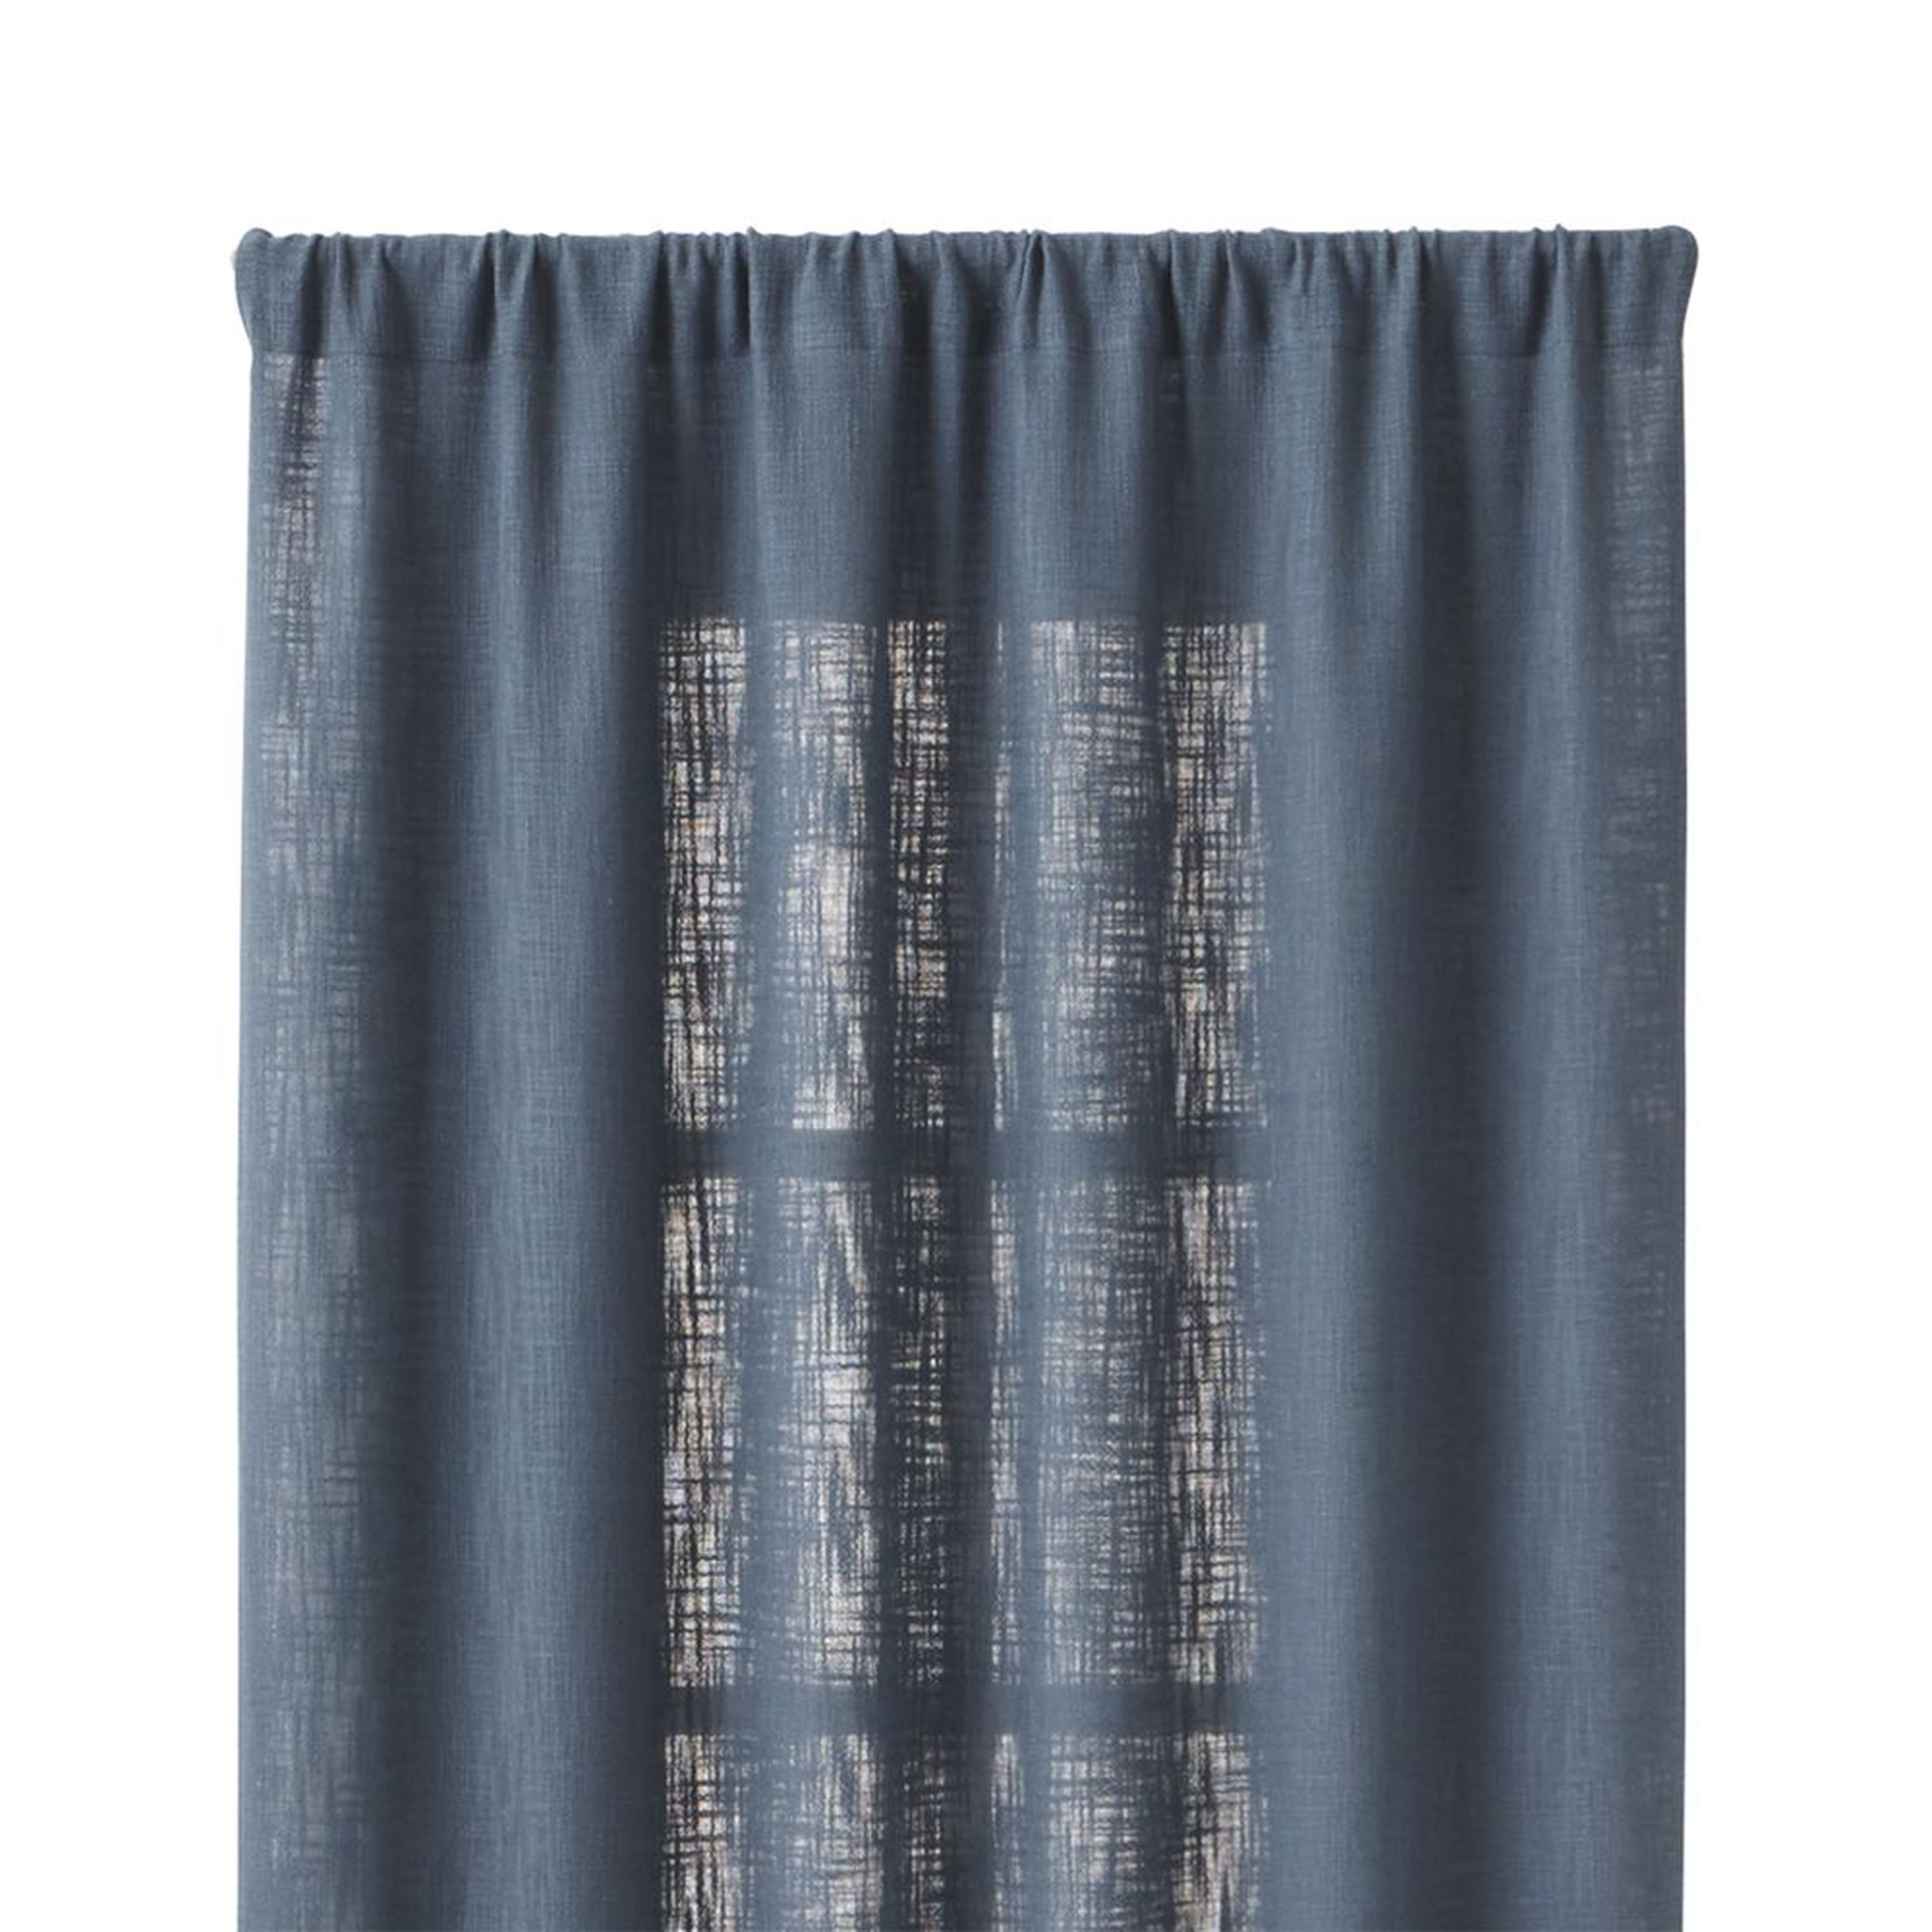 Lindstrom Blue 48"x84" Curtain Panel - Crate and Barrel